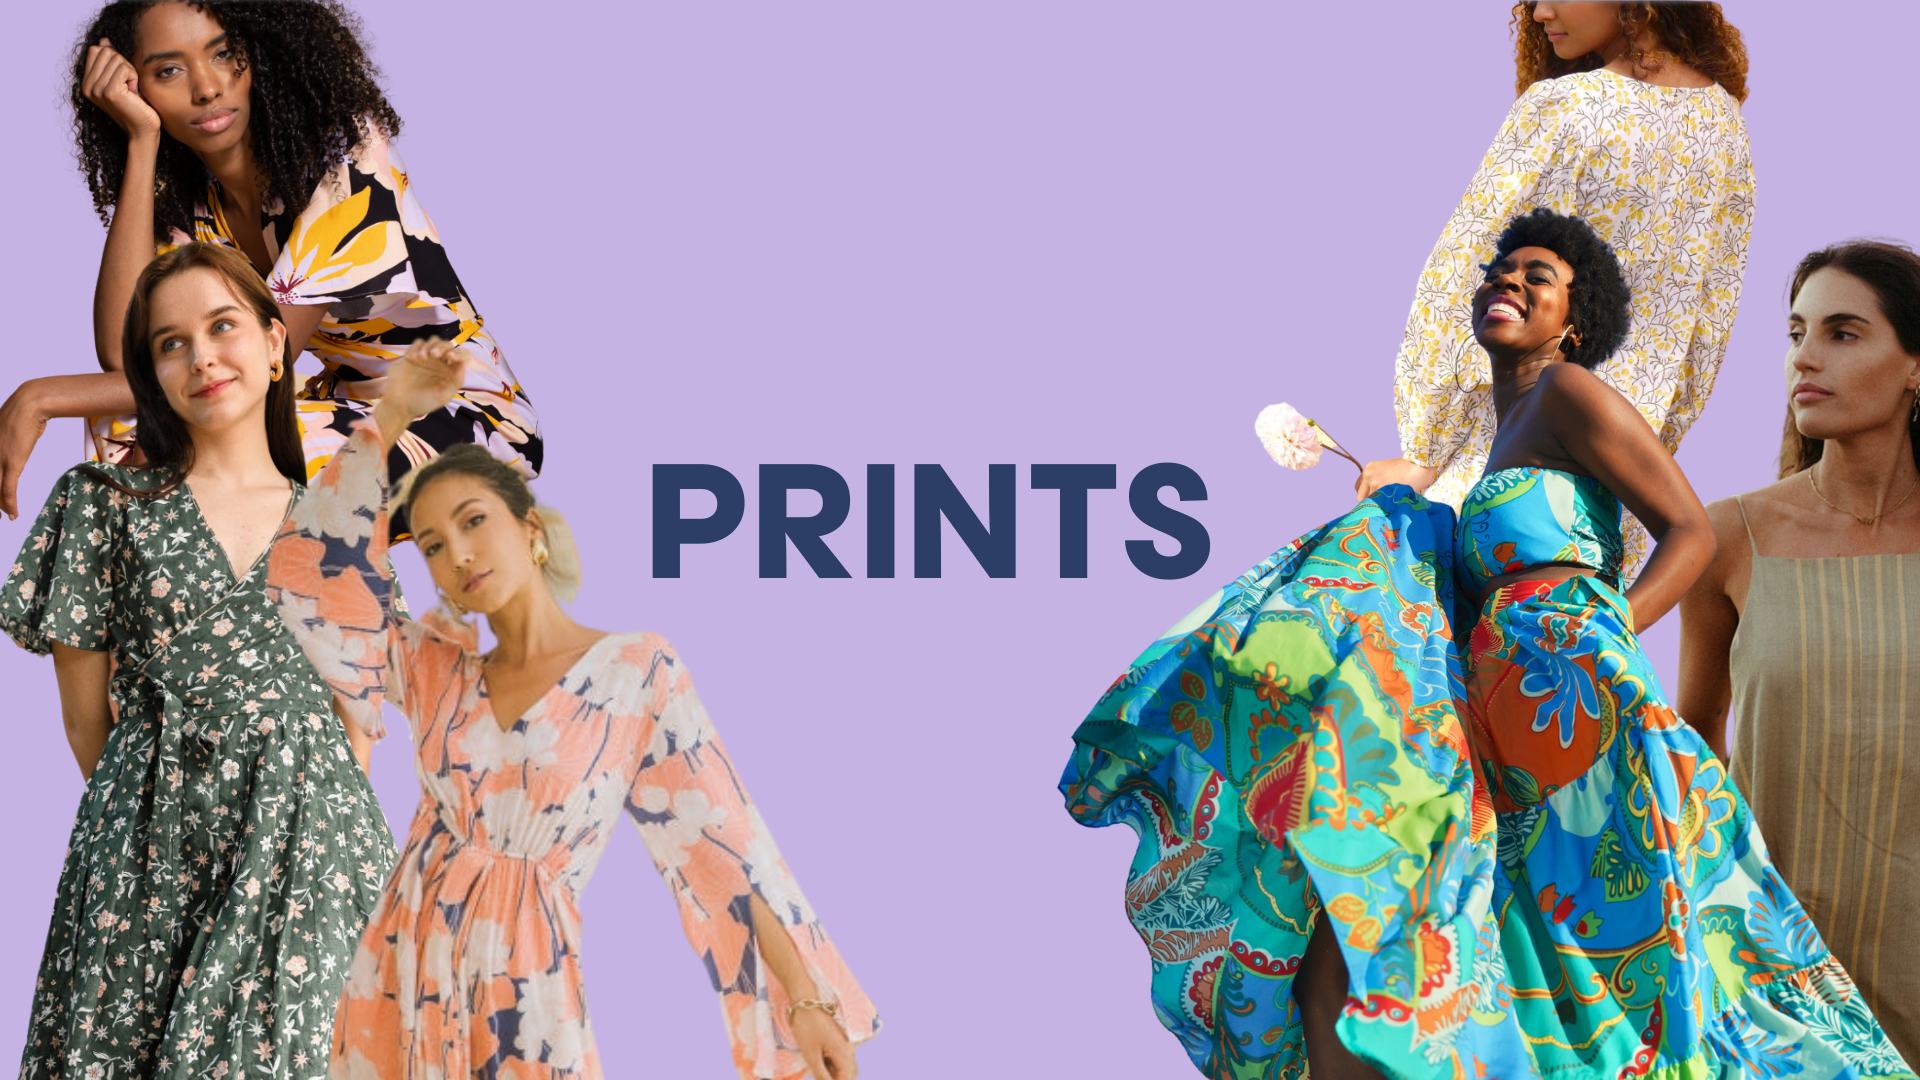 Effortless in Prints: At a Glance